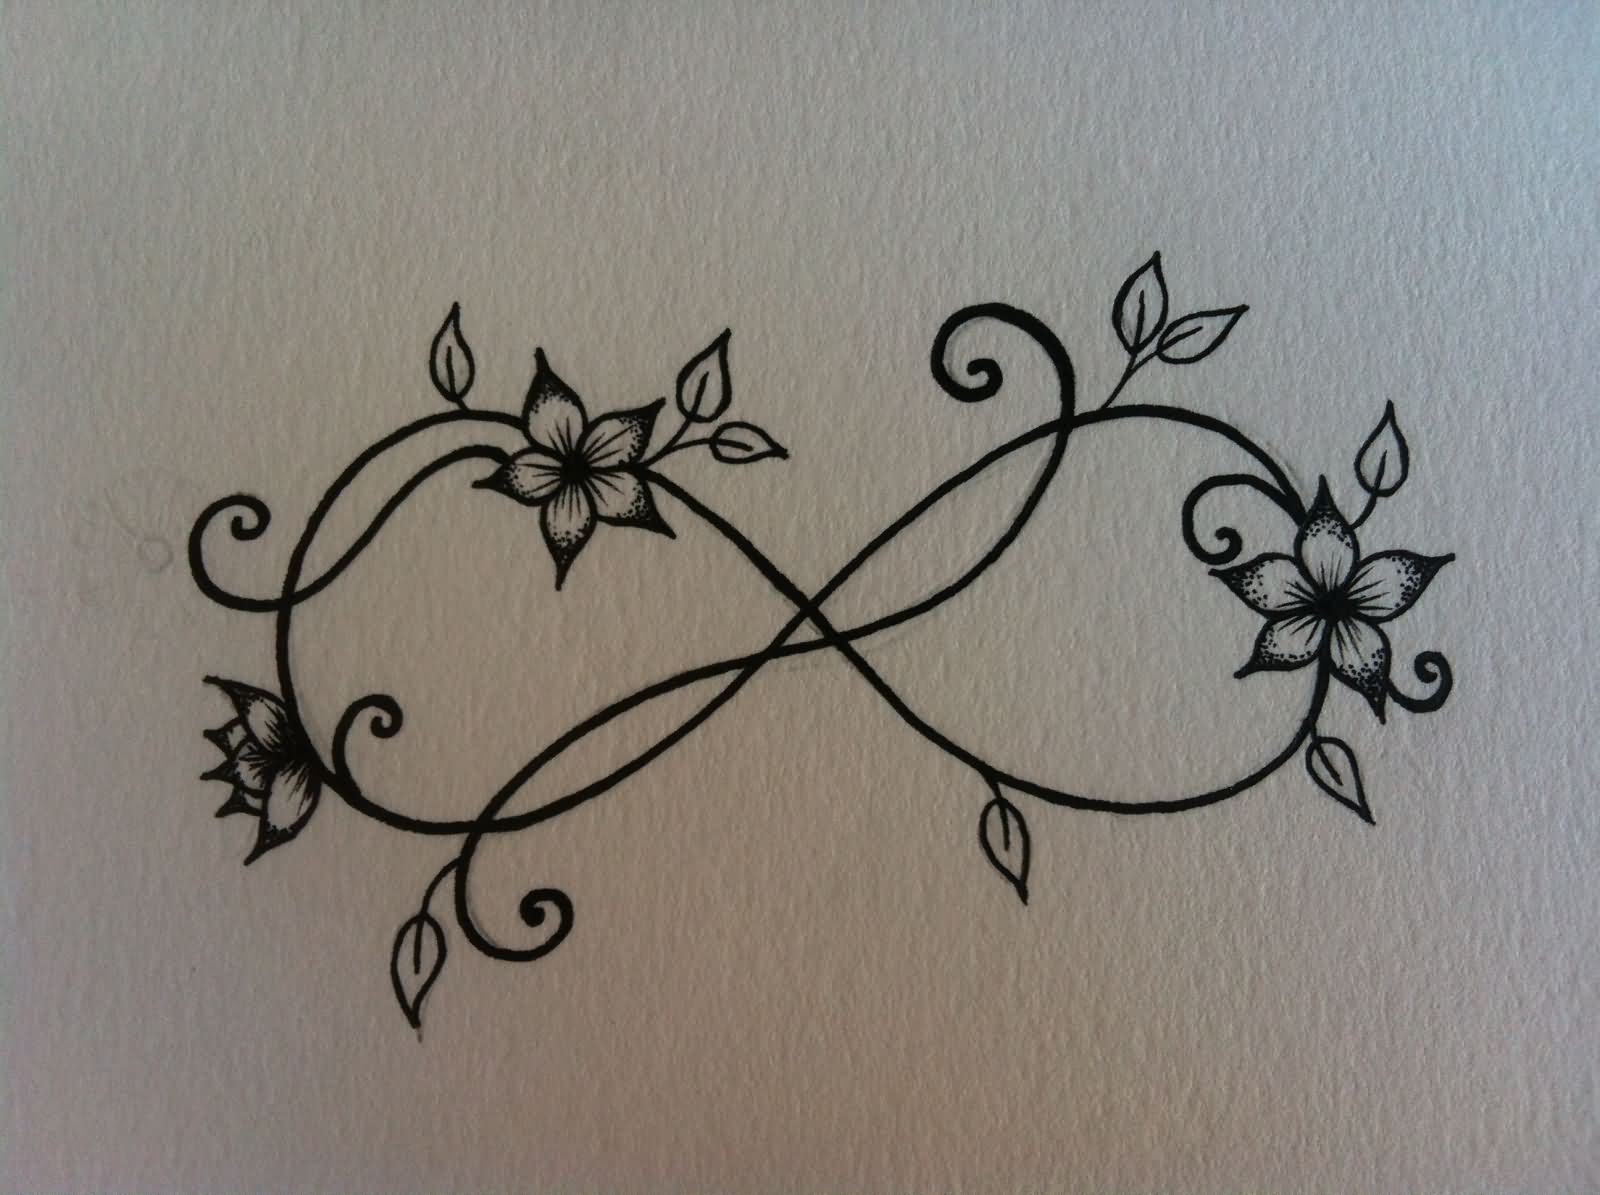 Black Ink Infinity With Flowers Tattoo Design